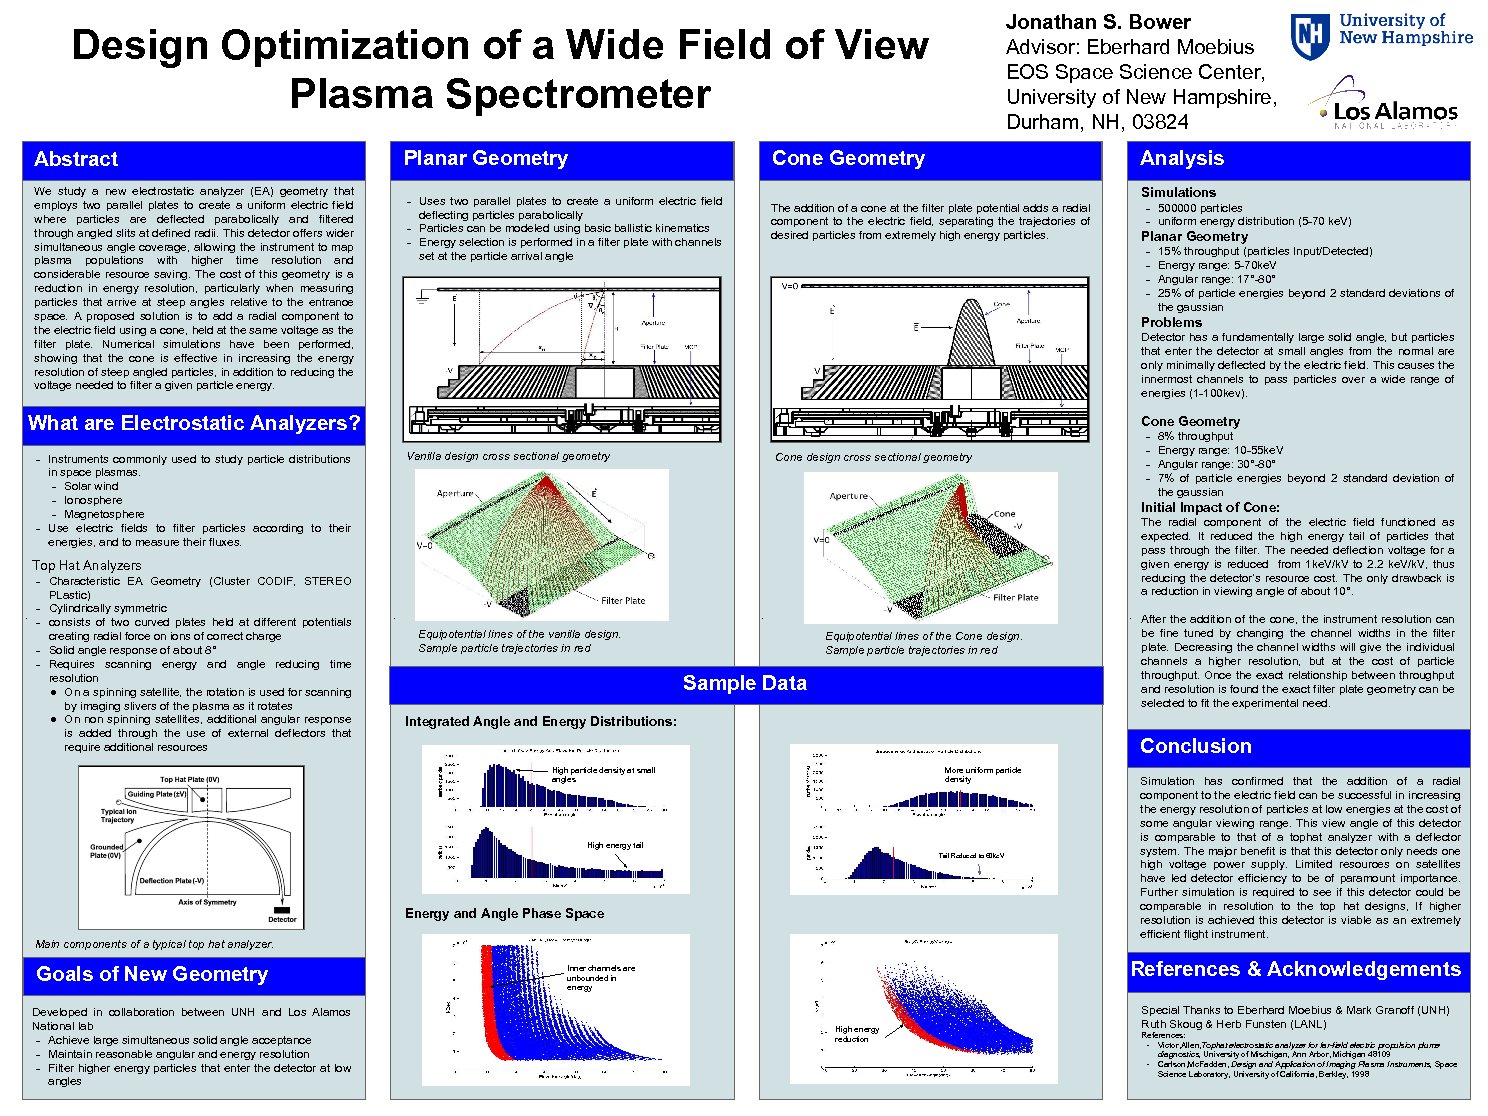 Design Optimization Of A Wide Field Of View Plasma Spectrometer by jsx54